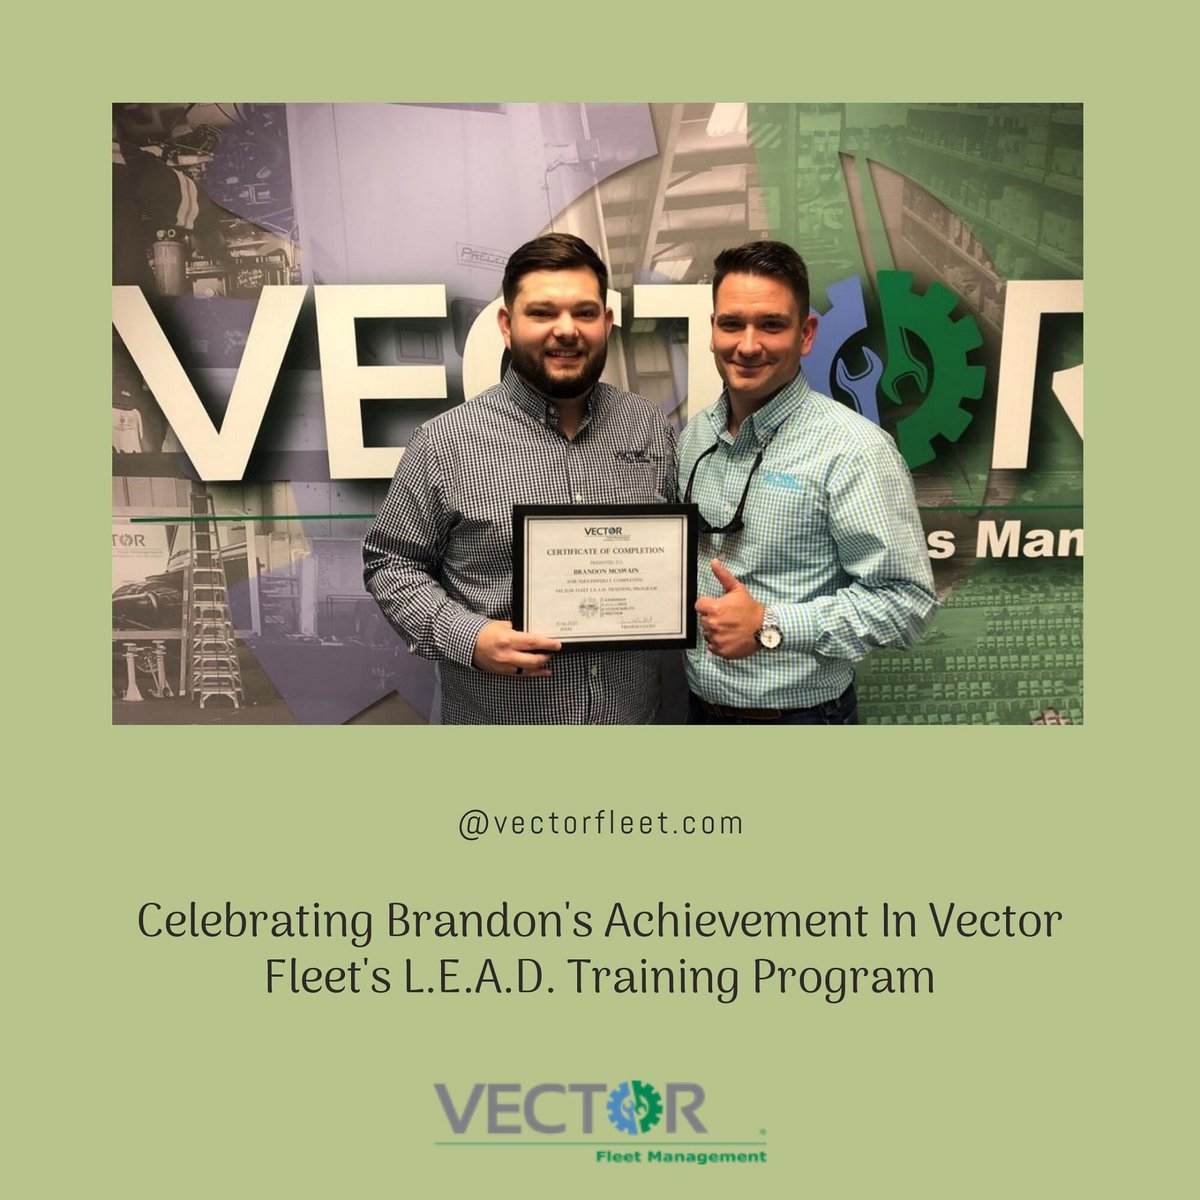 We would like to congratulate Brandon for successfully completing the Vector Fleet L.E.A.D. Training Program! 🥳 We applaud his dedication and wish him continued success in his career. 🌟
#fleet #training #fleetmanagement #skills #leadership #fleetoperations